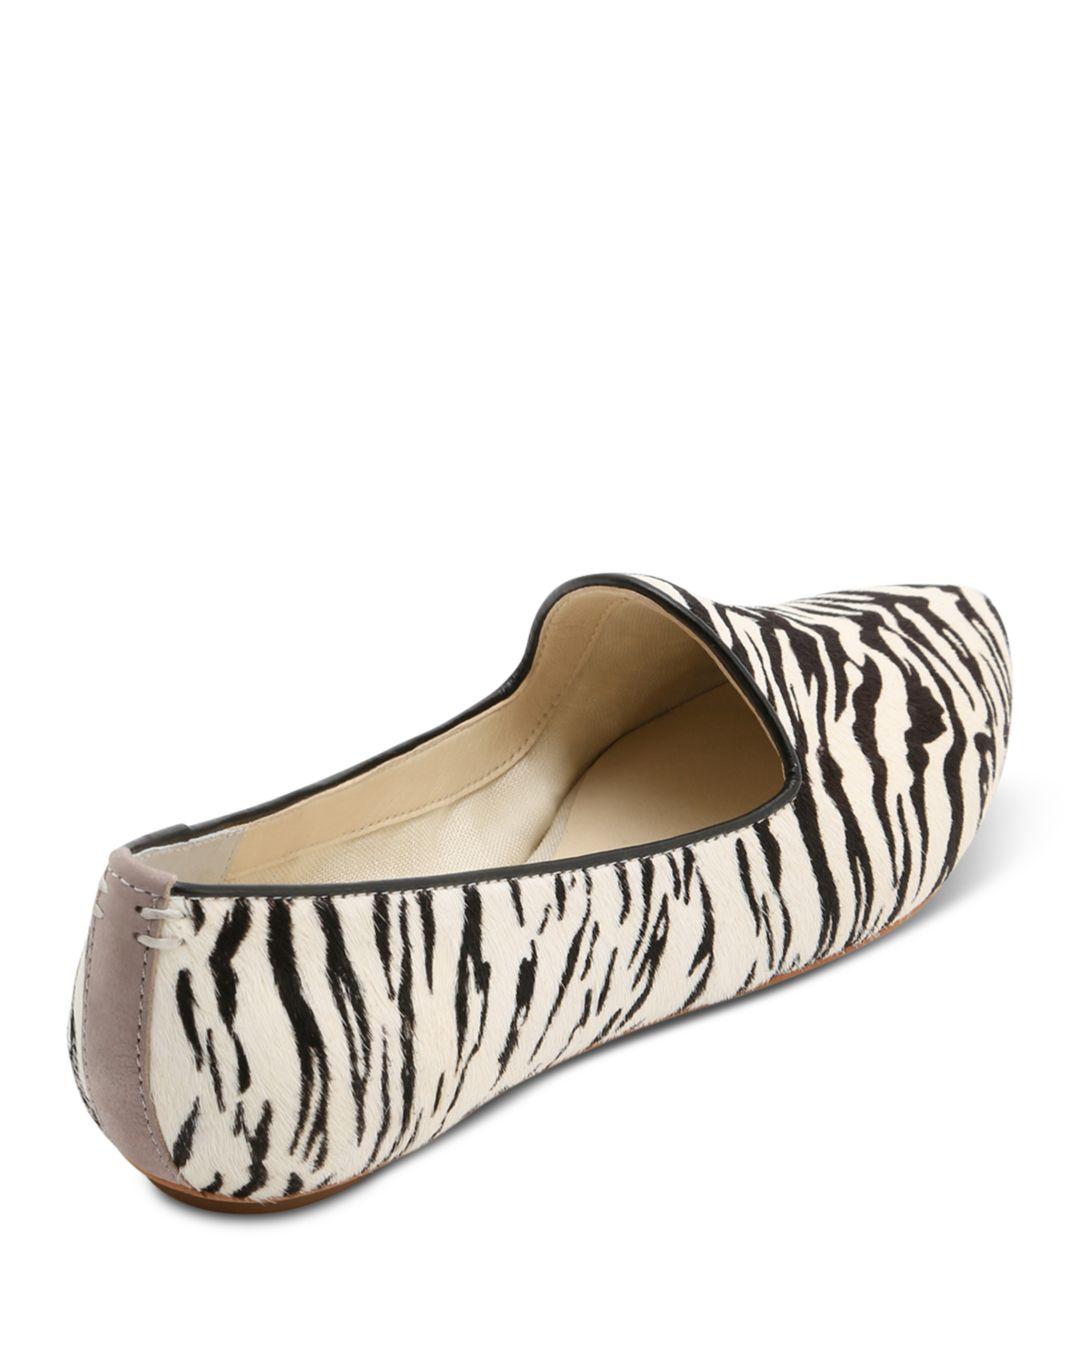 dolce vita gail loafers